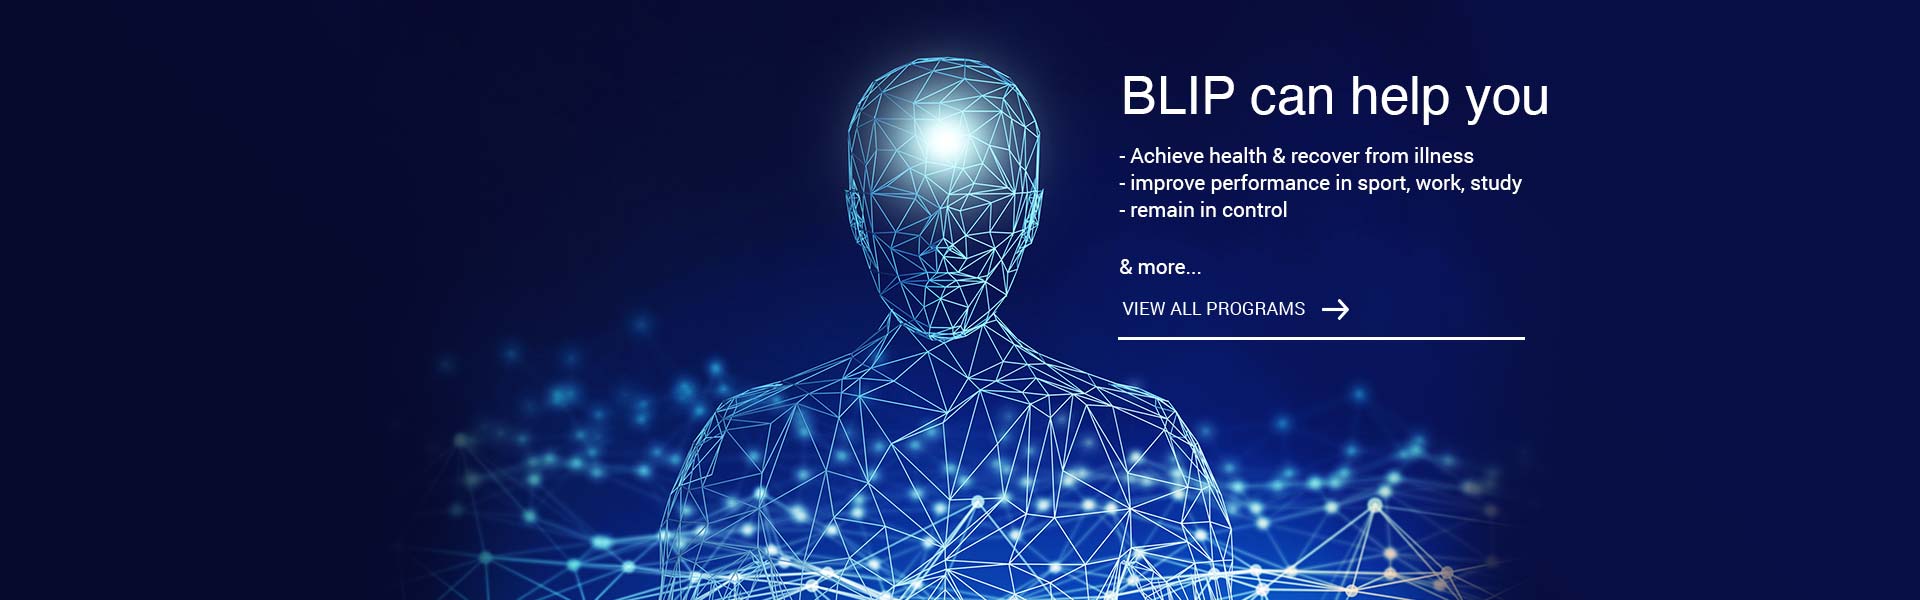 BLIP can help you with so many things. Book Now